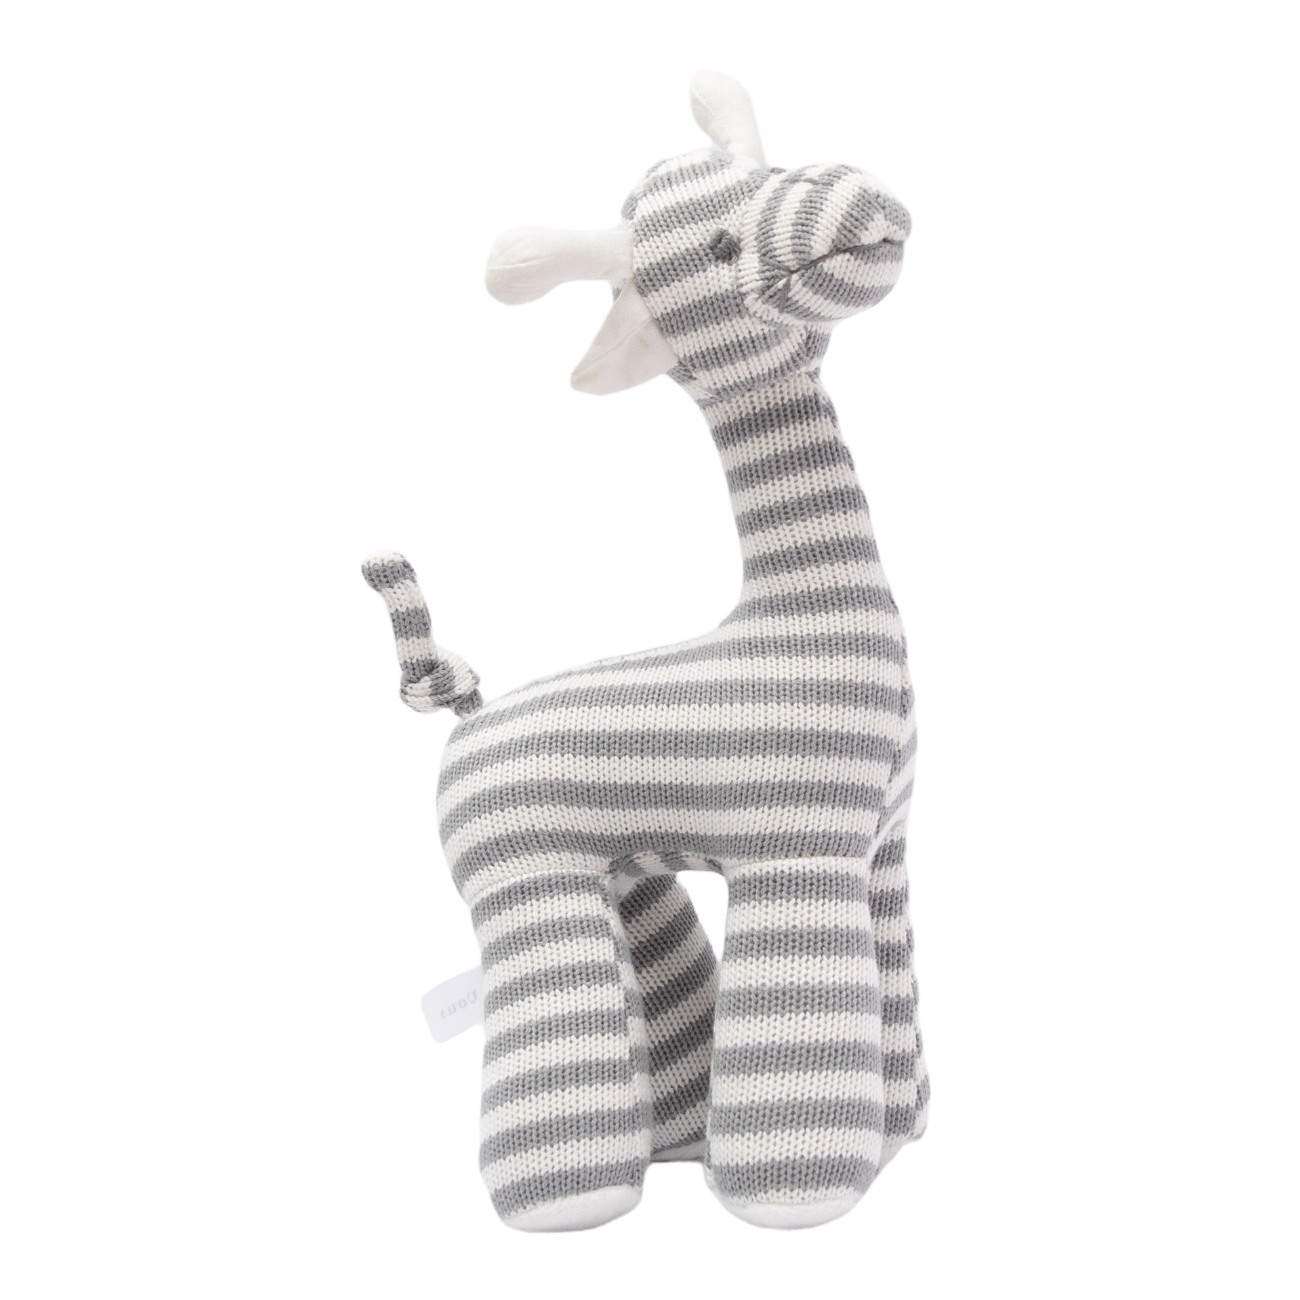 Petite Vous Jerry the Giraffe Cotton Knit Toy